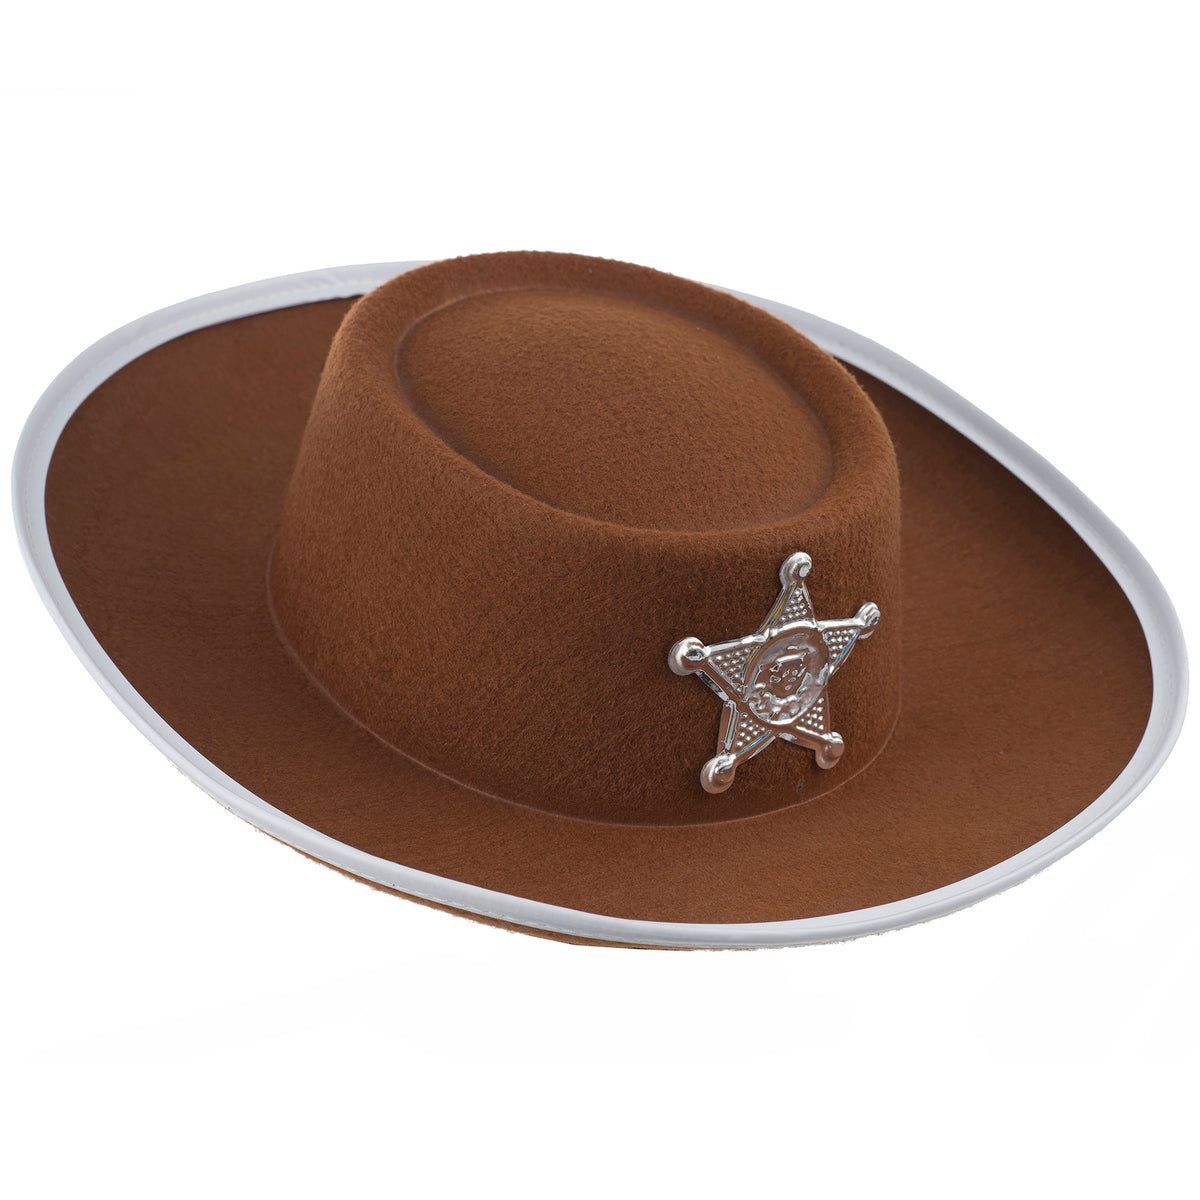 Childrens Roleplay Fancy Dress Cowboy Hat - Brown